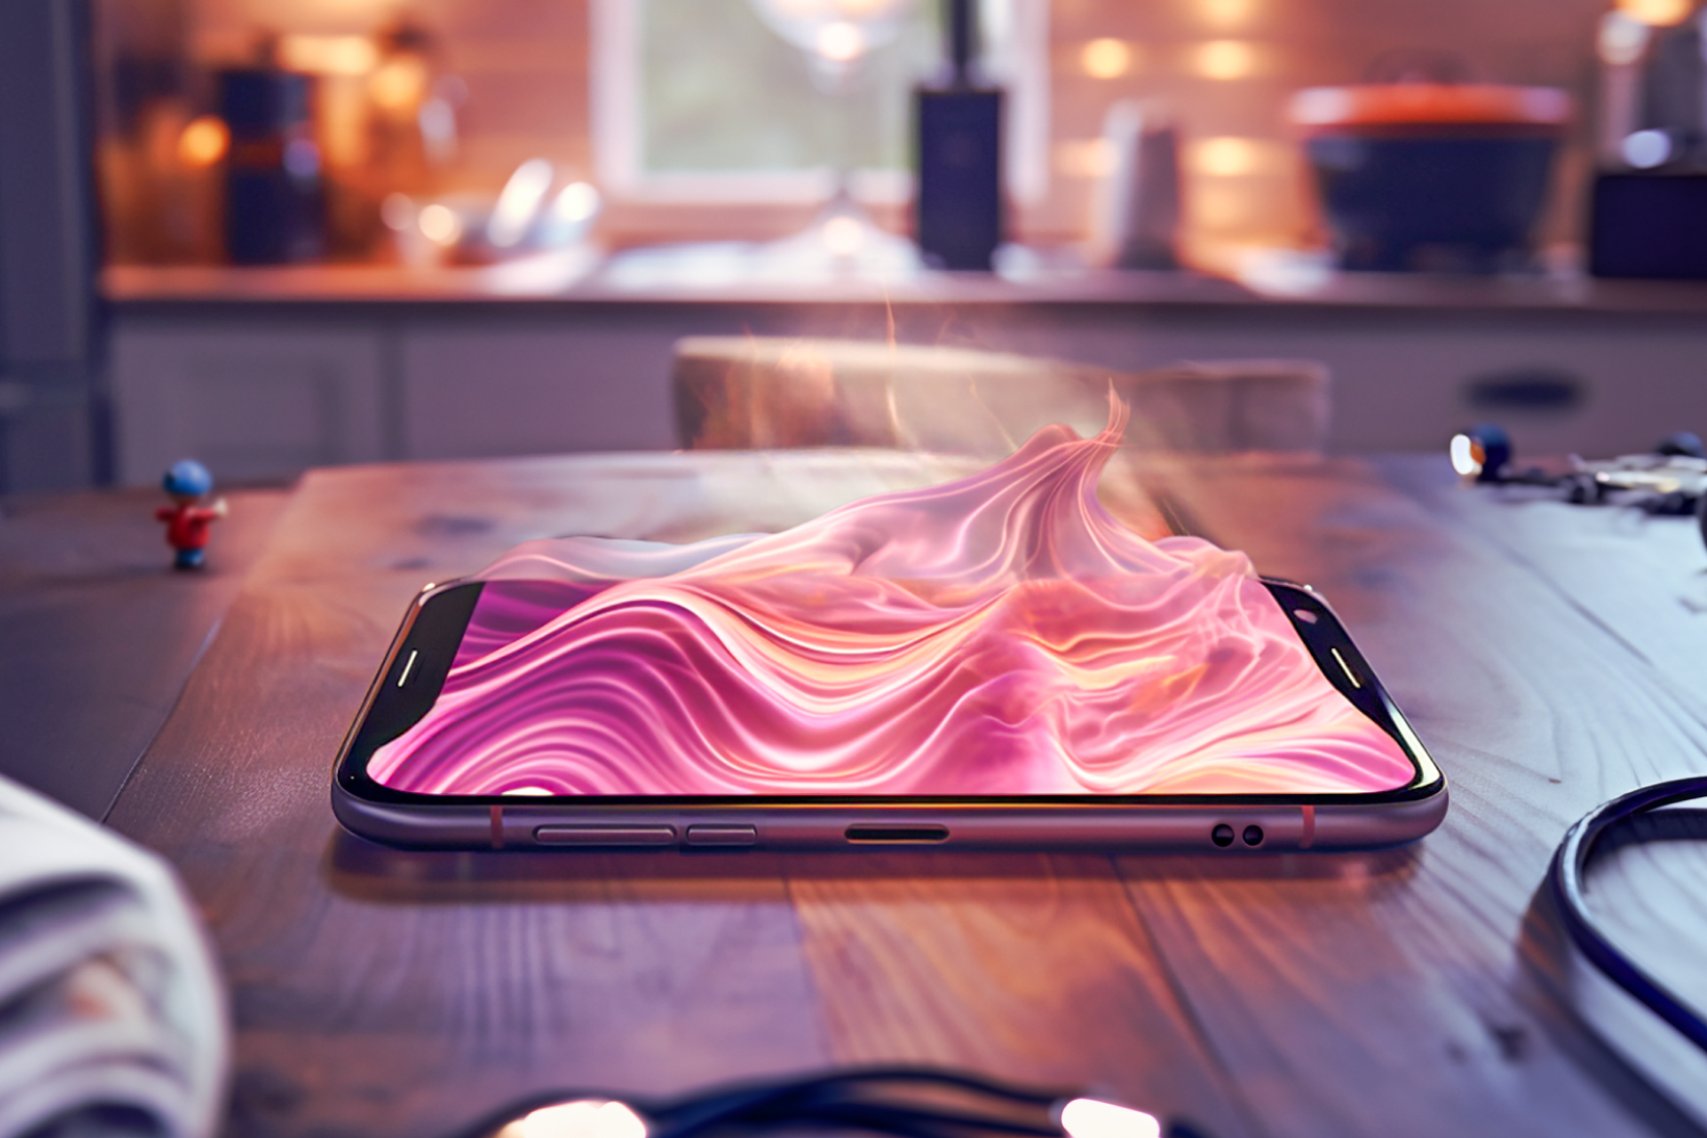 Smartphone laying on a table and the screen is popping out with wave like texture.